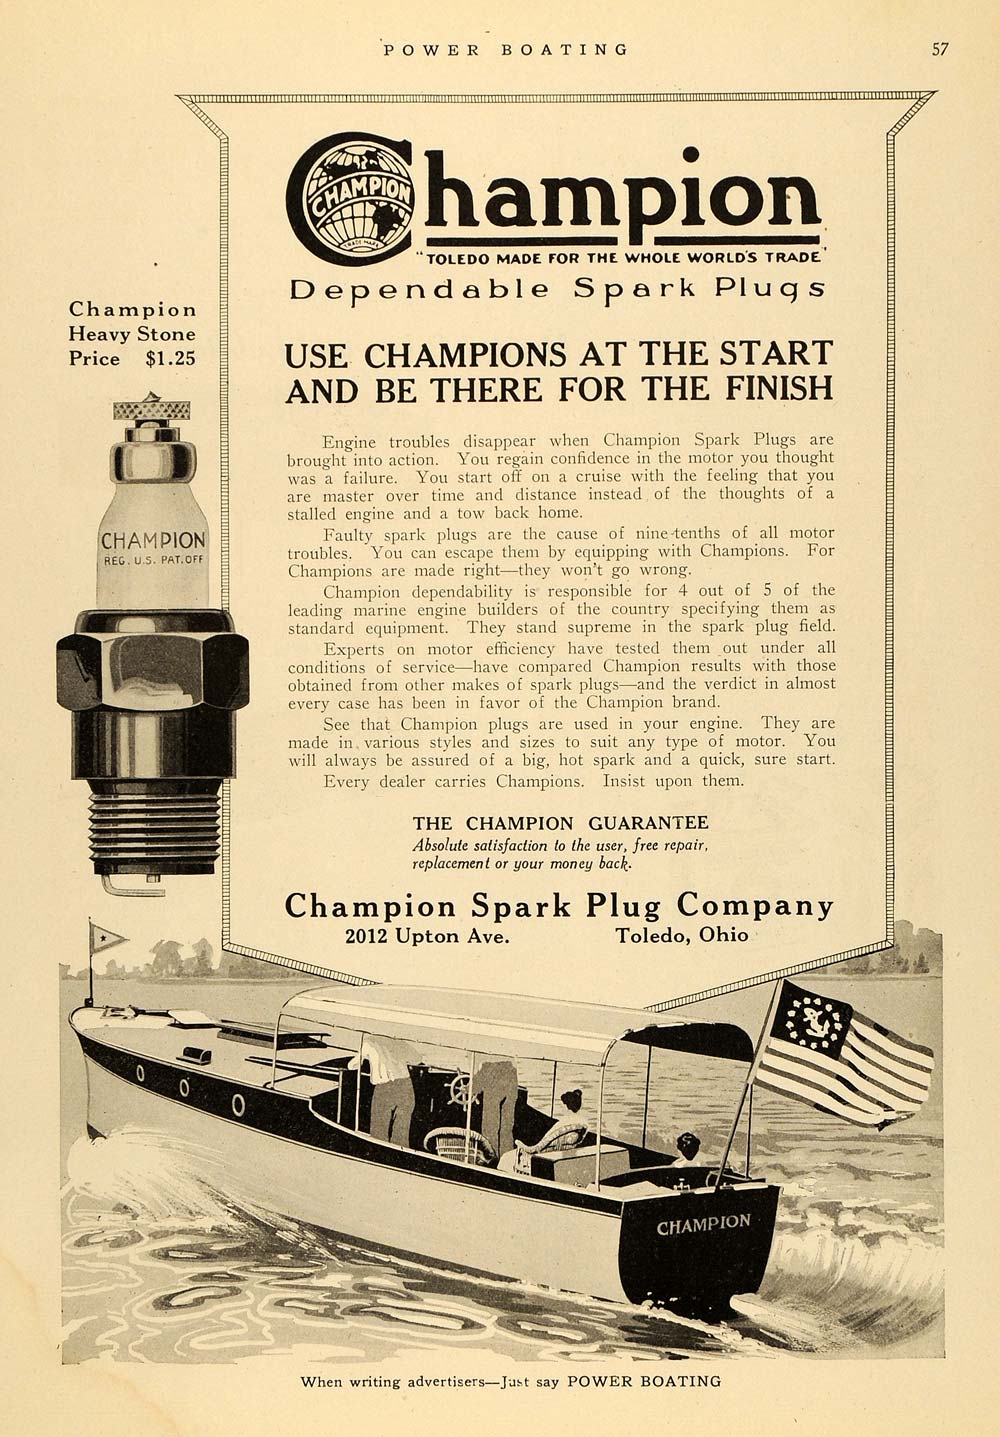 1916 Ad Champion Spark Plugs Boating Heavy Stone Toldeo - ORIGINAL MB1